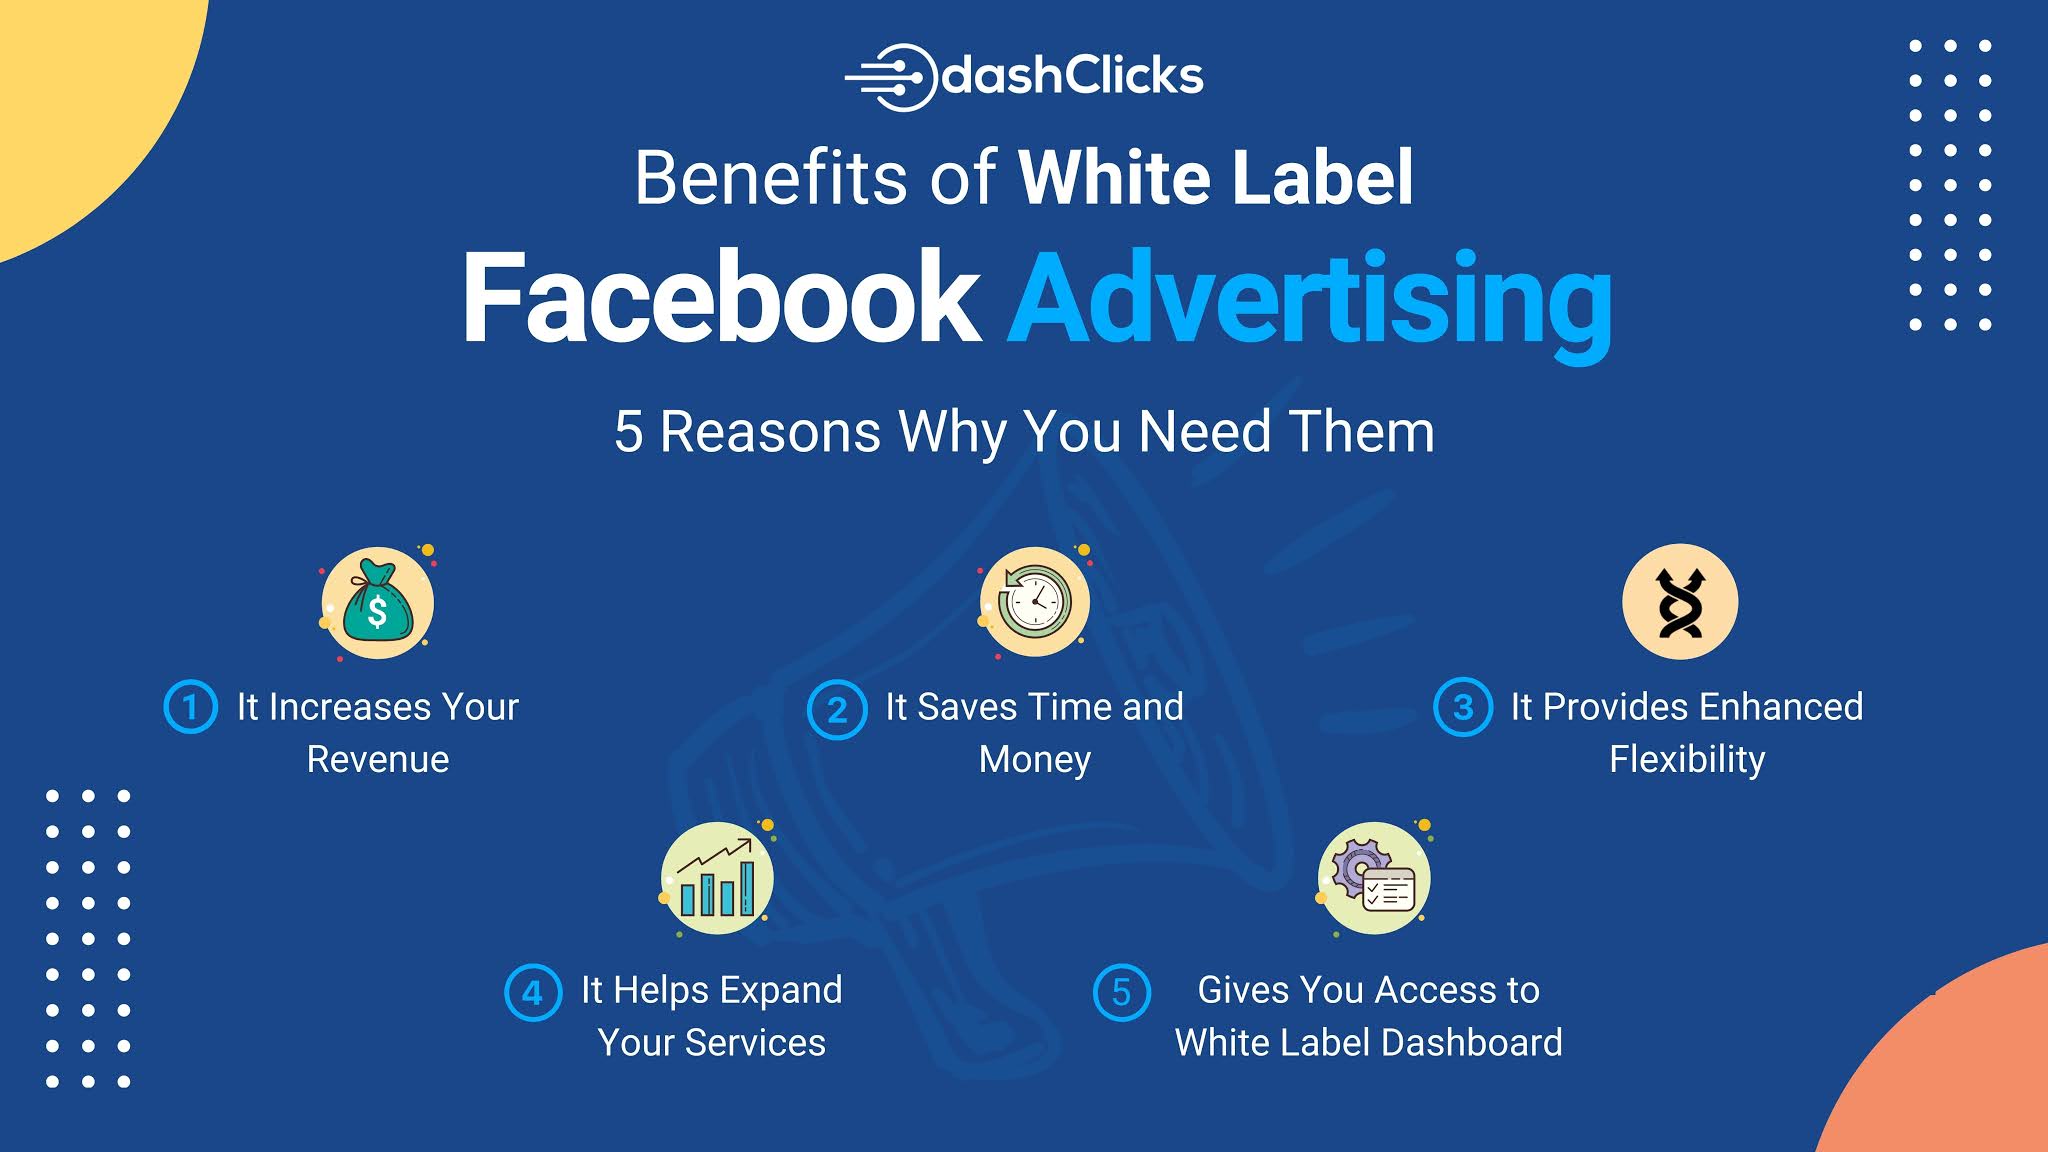 Benefits of White Label Facebook Advertising: 5 Reasons Why You Need Them